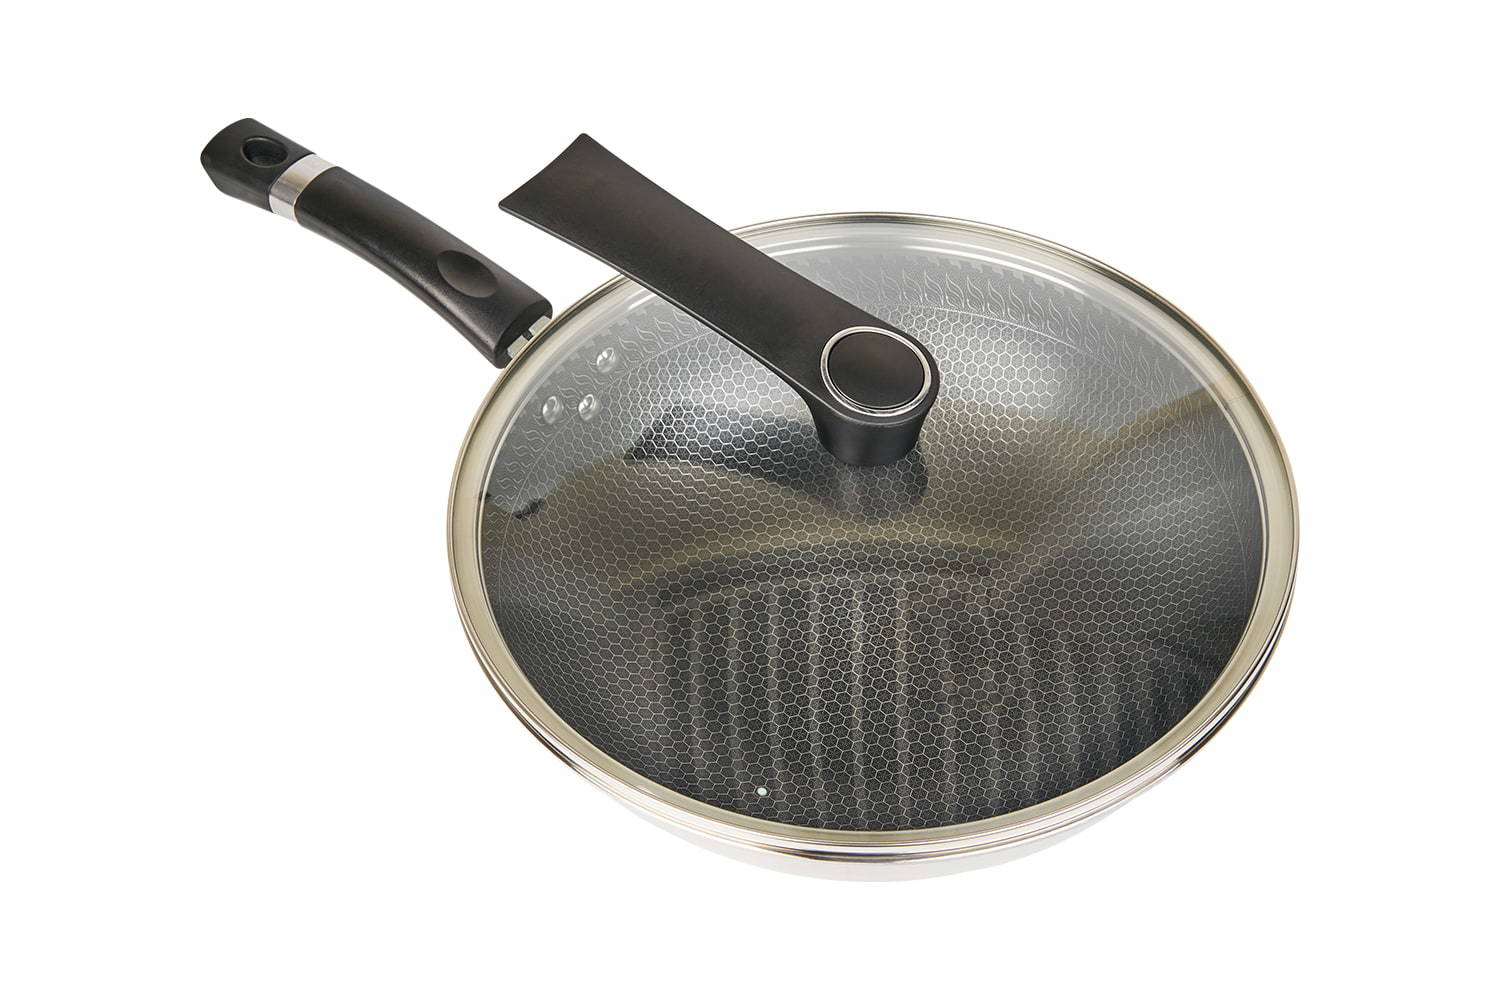 CF34C-CJ598 Stainless Steel Wok with Glass Lid, Etching Non-Stick Coating, Scratch-resistant, household